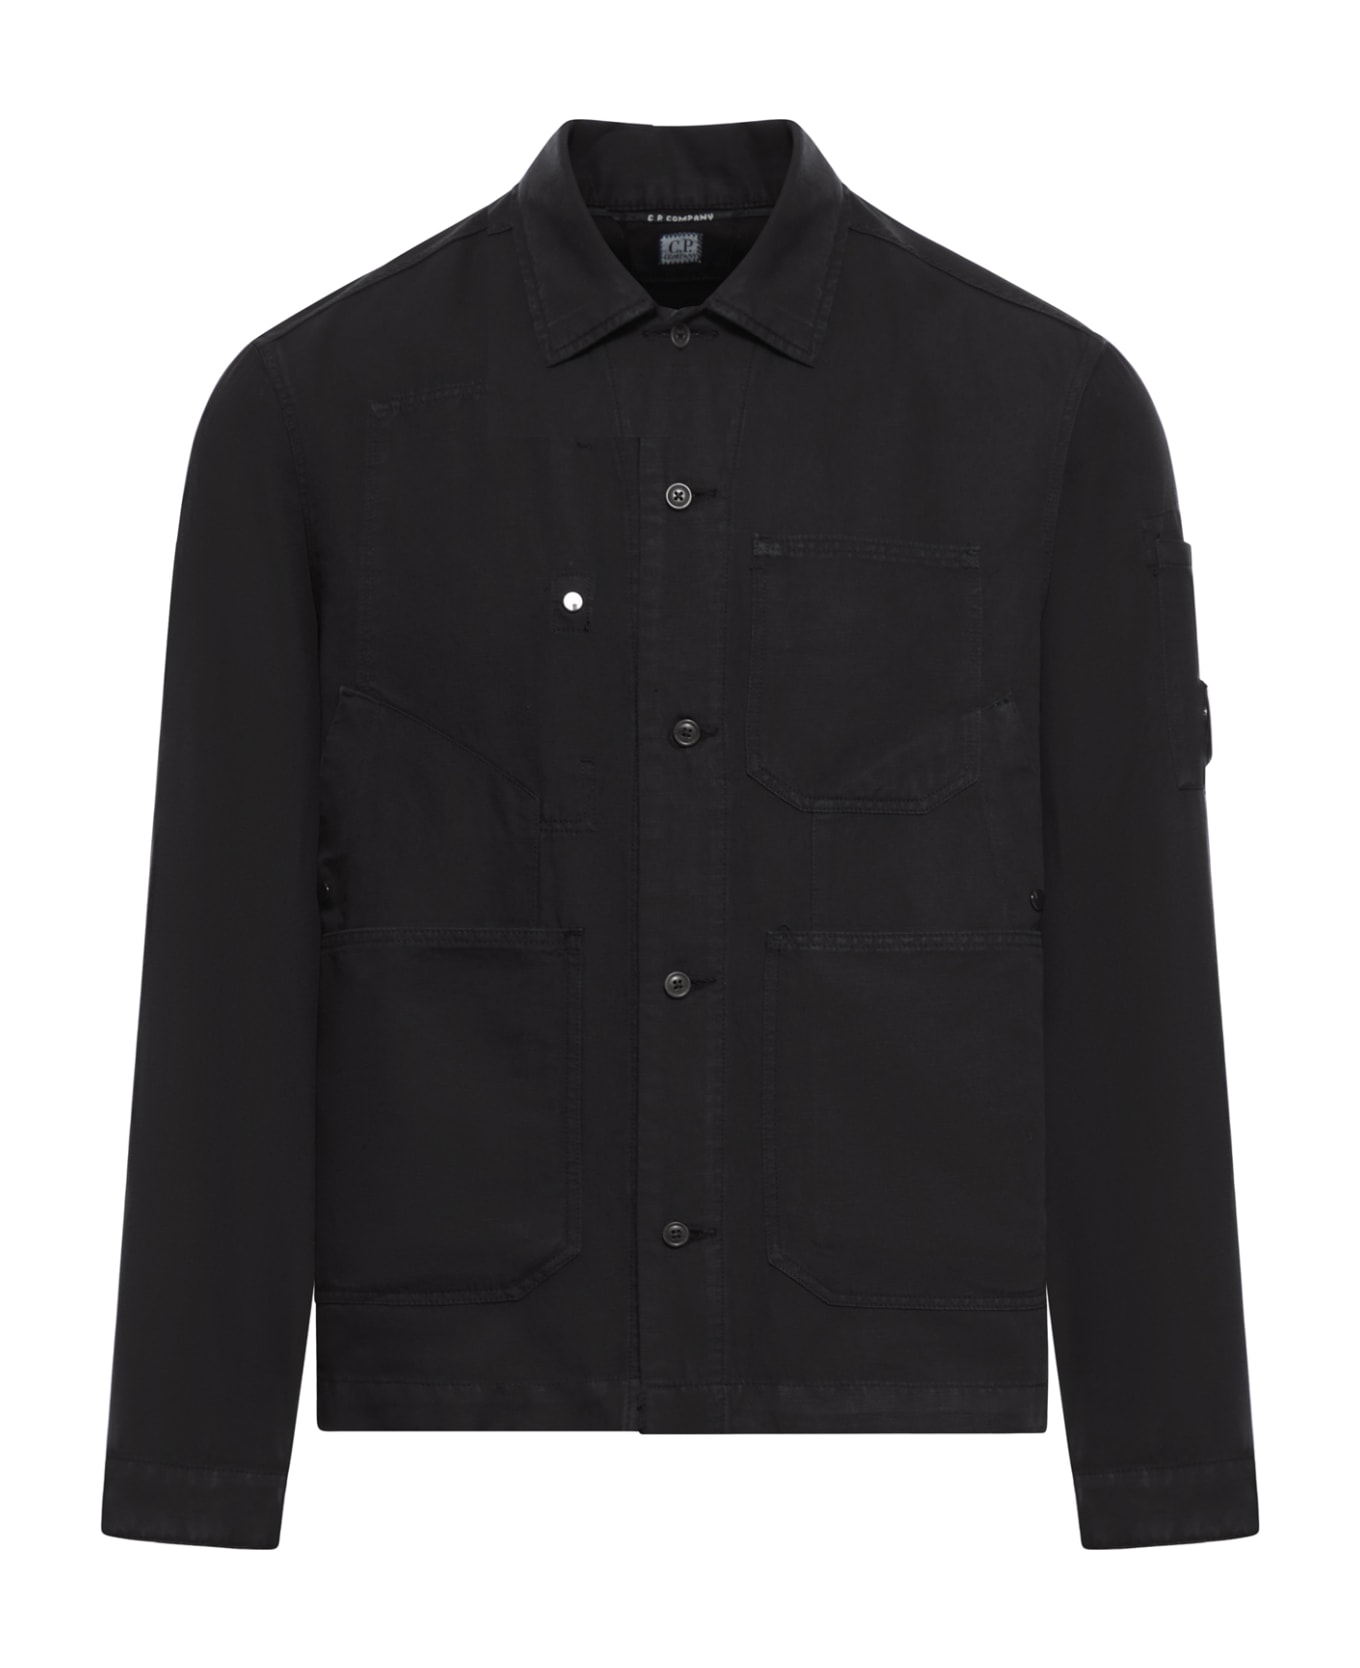 C.P. Company Patched Pocket Buttoned Overshirt - Black